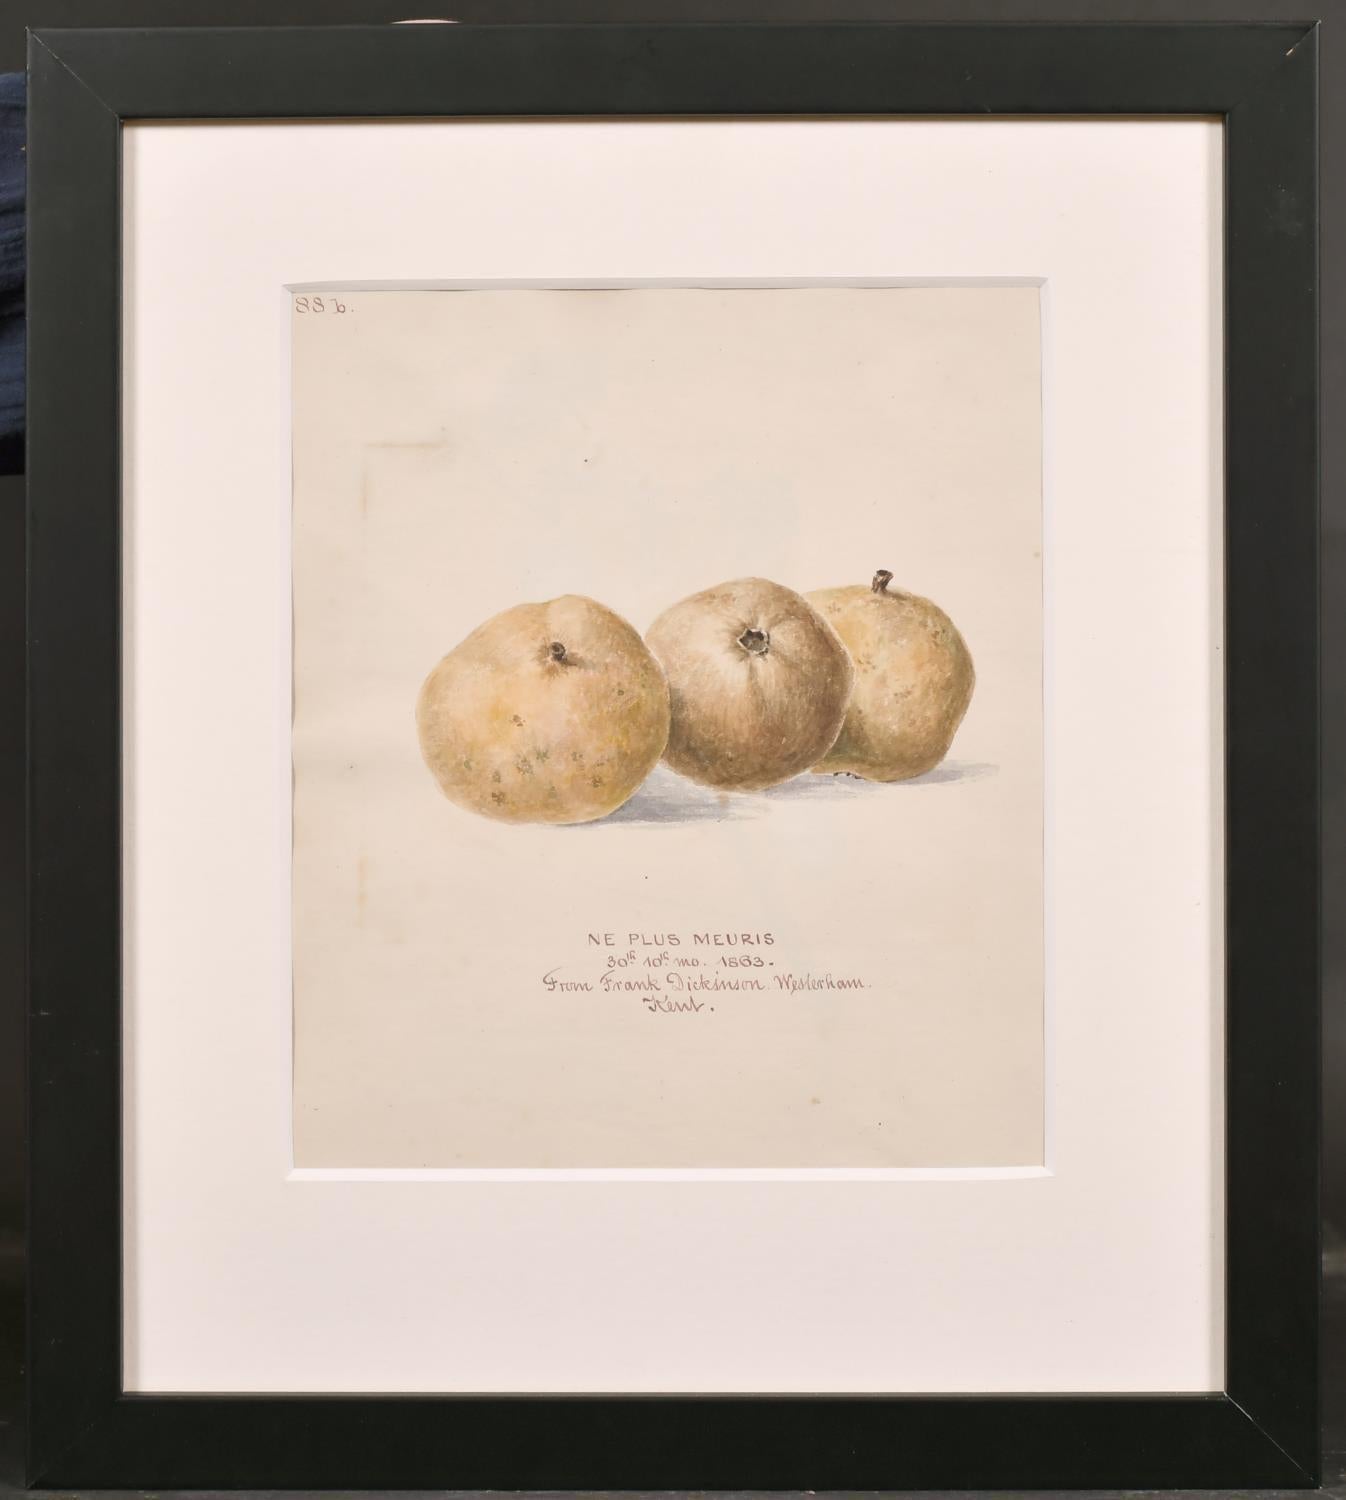 Artist / School: English School, 19th century, dated 1863

Title: botannical study 'Ne Plus Meuris'

Medium: watercolour drawing on paper, with ink inscription below

Size: image: 9.5 x 7.75 inches, overall frame: 15 x 13